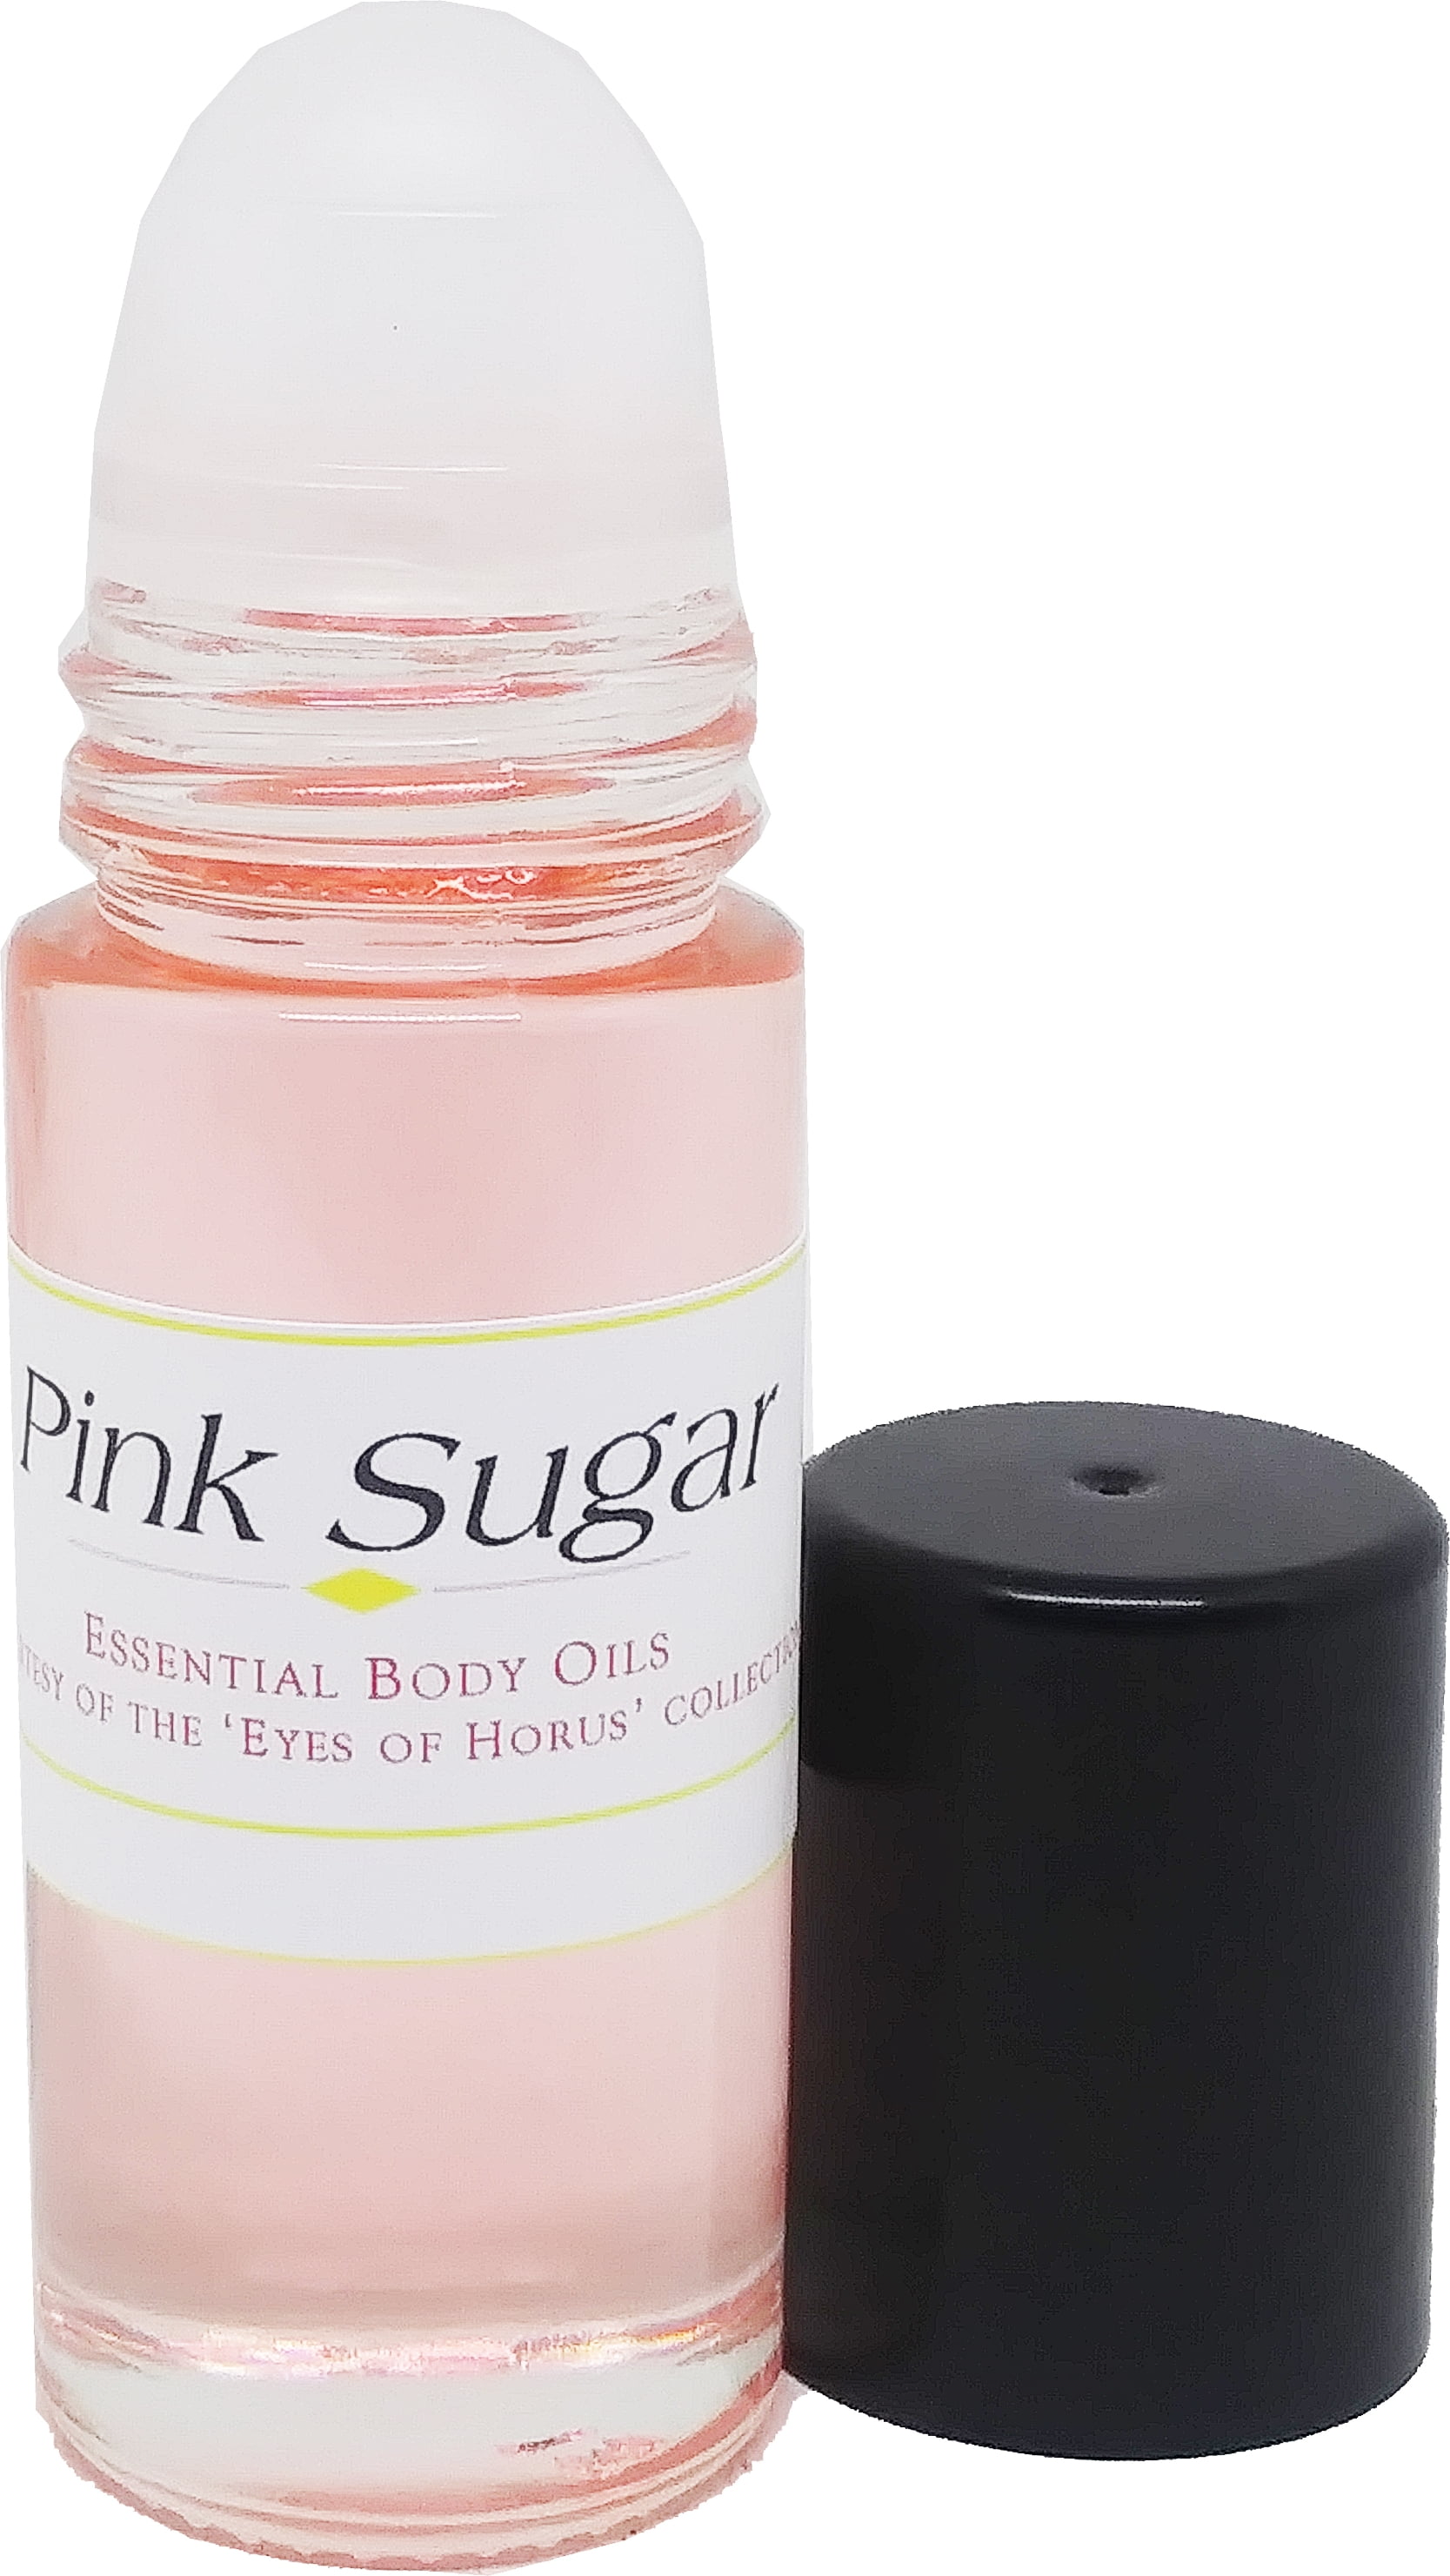 PINK SUGAR body oil fragrance 4oz for Sale in Wilkes-Barre, PA